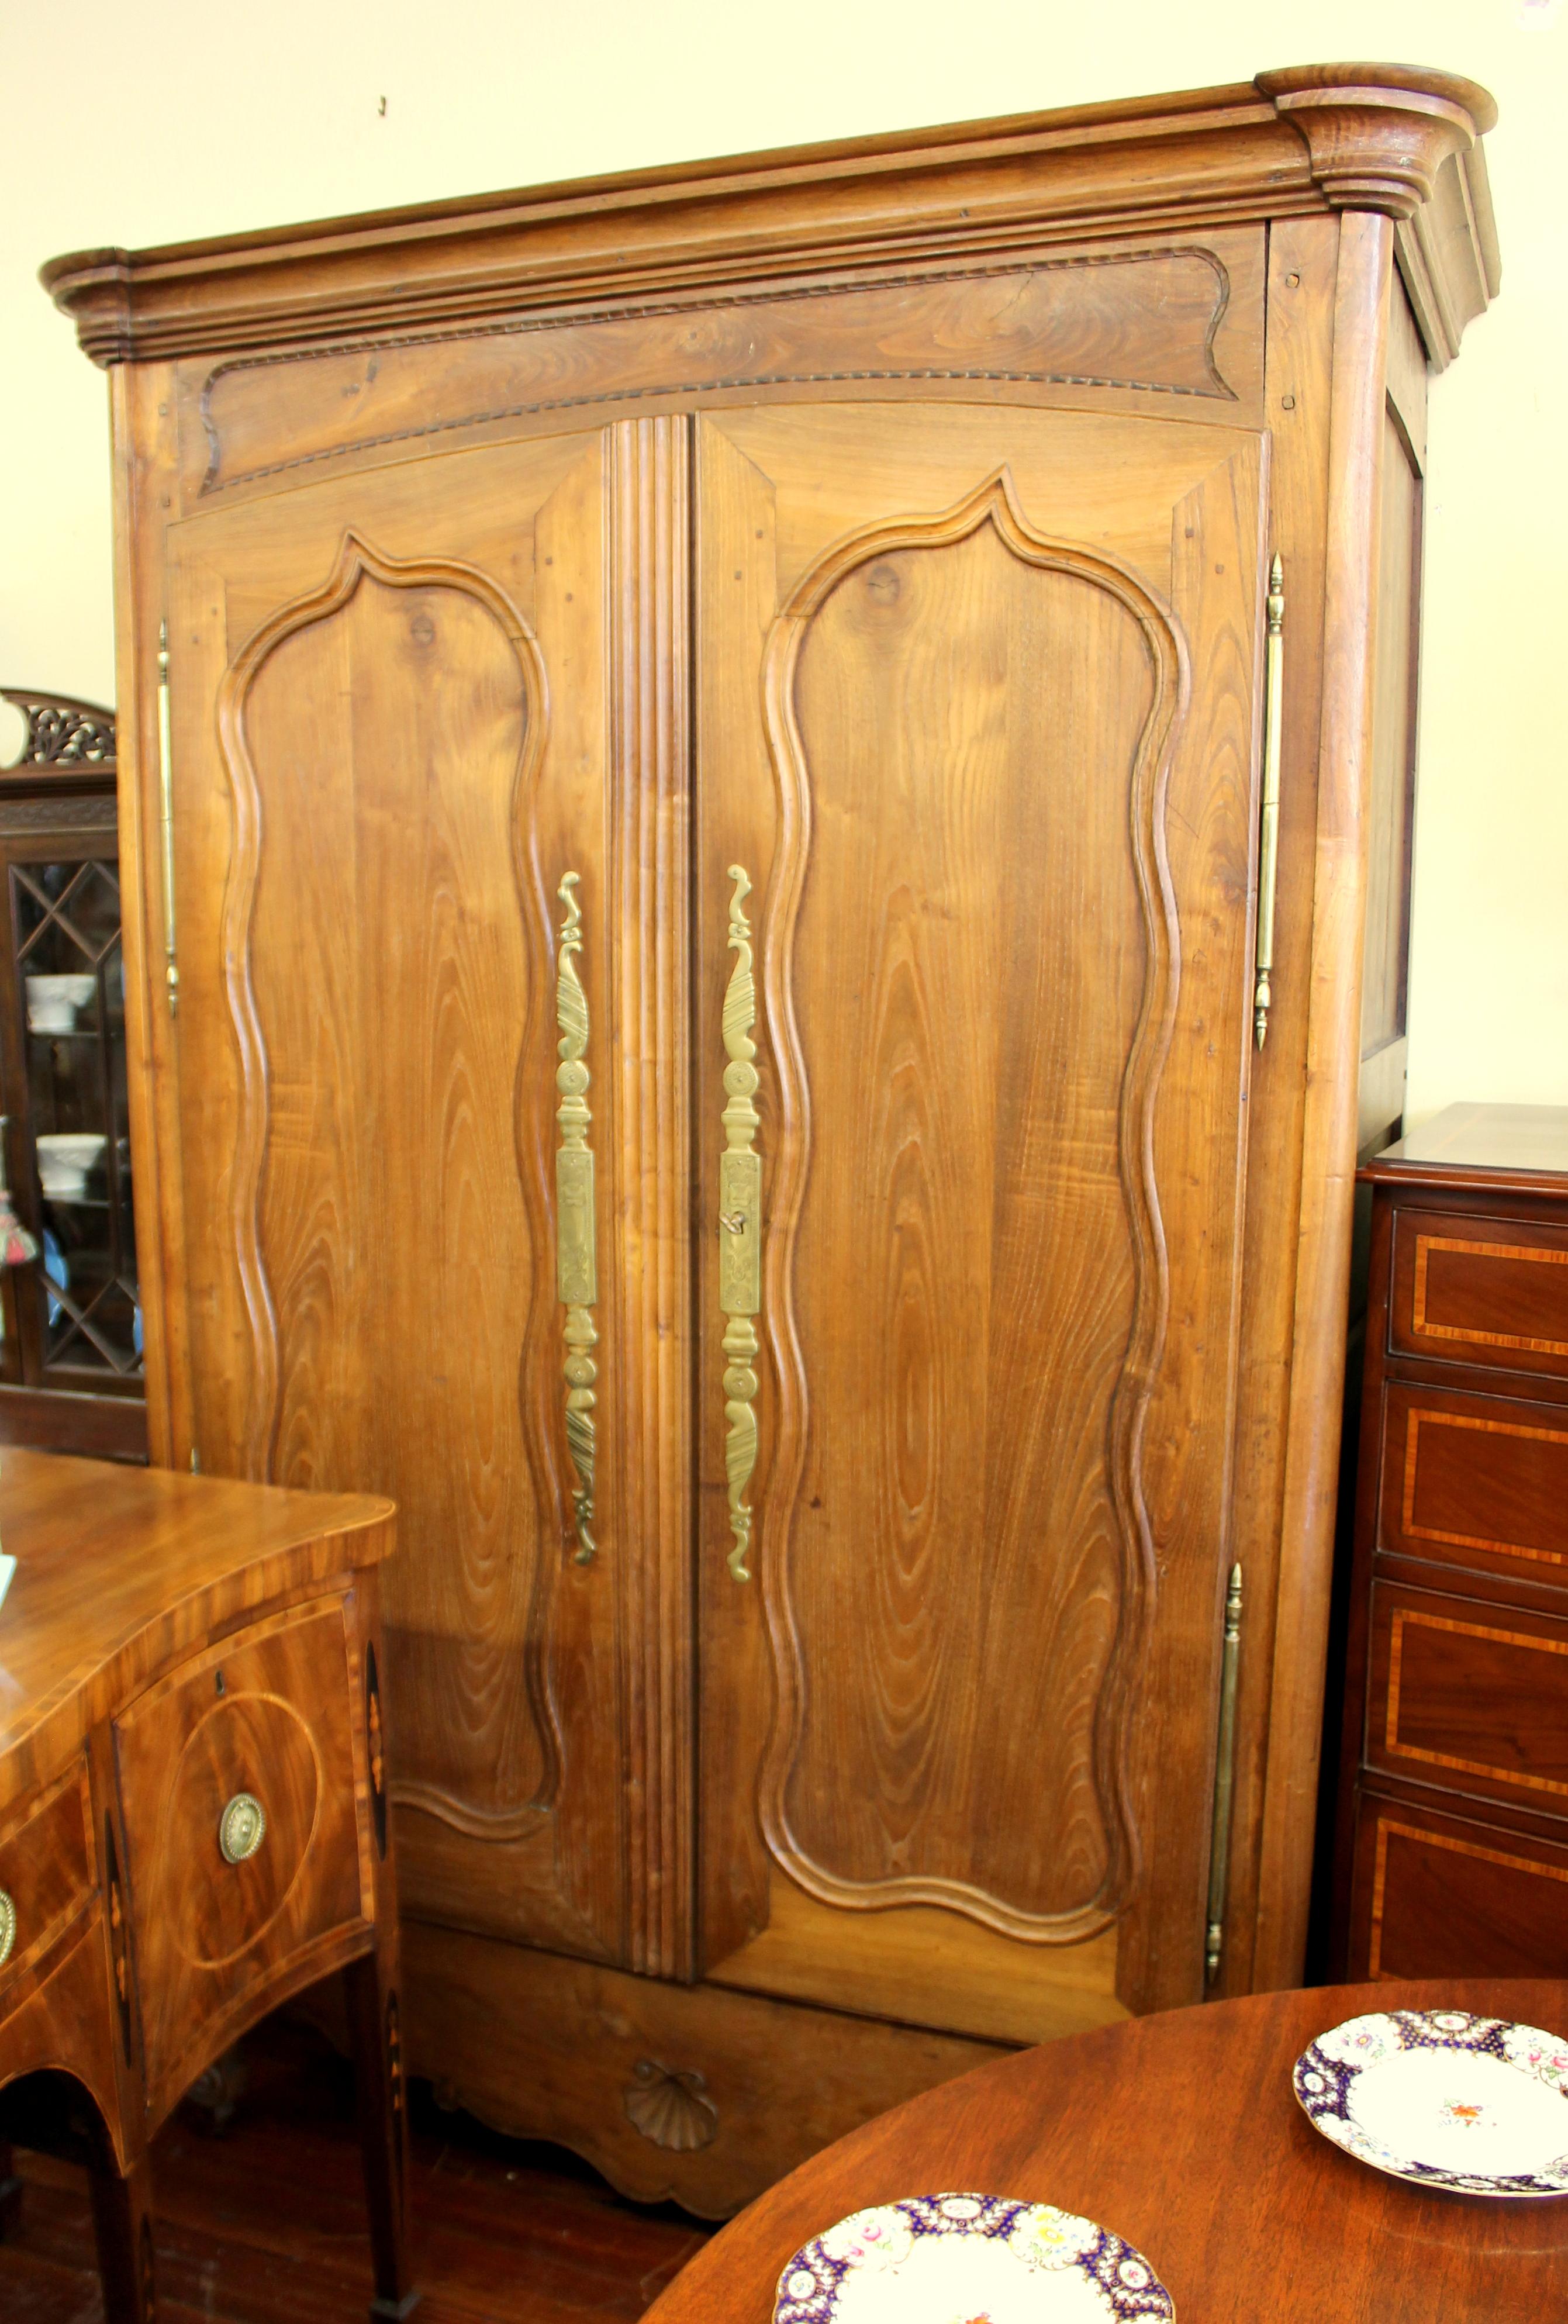 Fabulous quality antique French hand-carved Louis XV fruitwood armoire. Lovely honey colored, figured fruitwood.
Please note gorgeous, original chased brass hardware and carving throughout; toille paper inside. Interior shelves are removable.